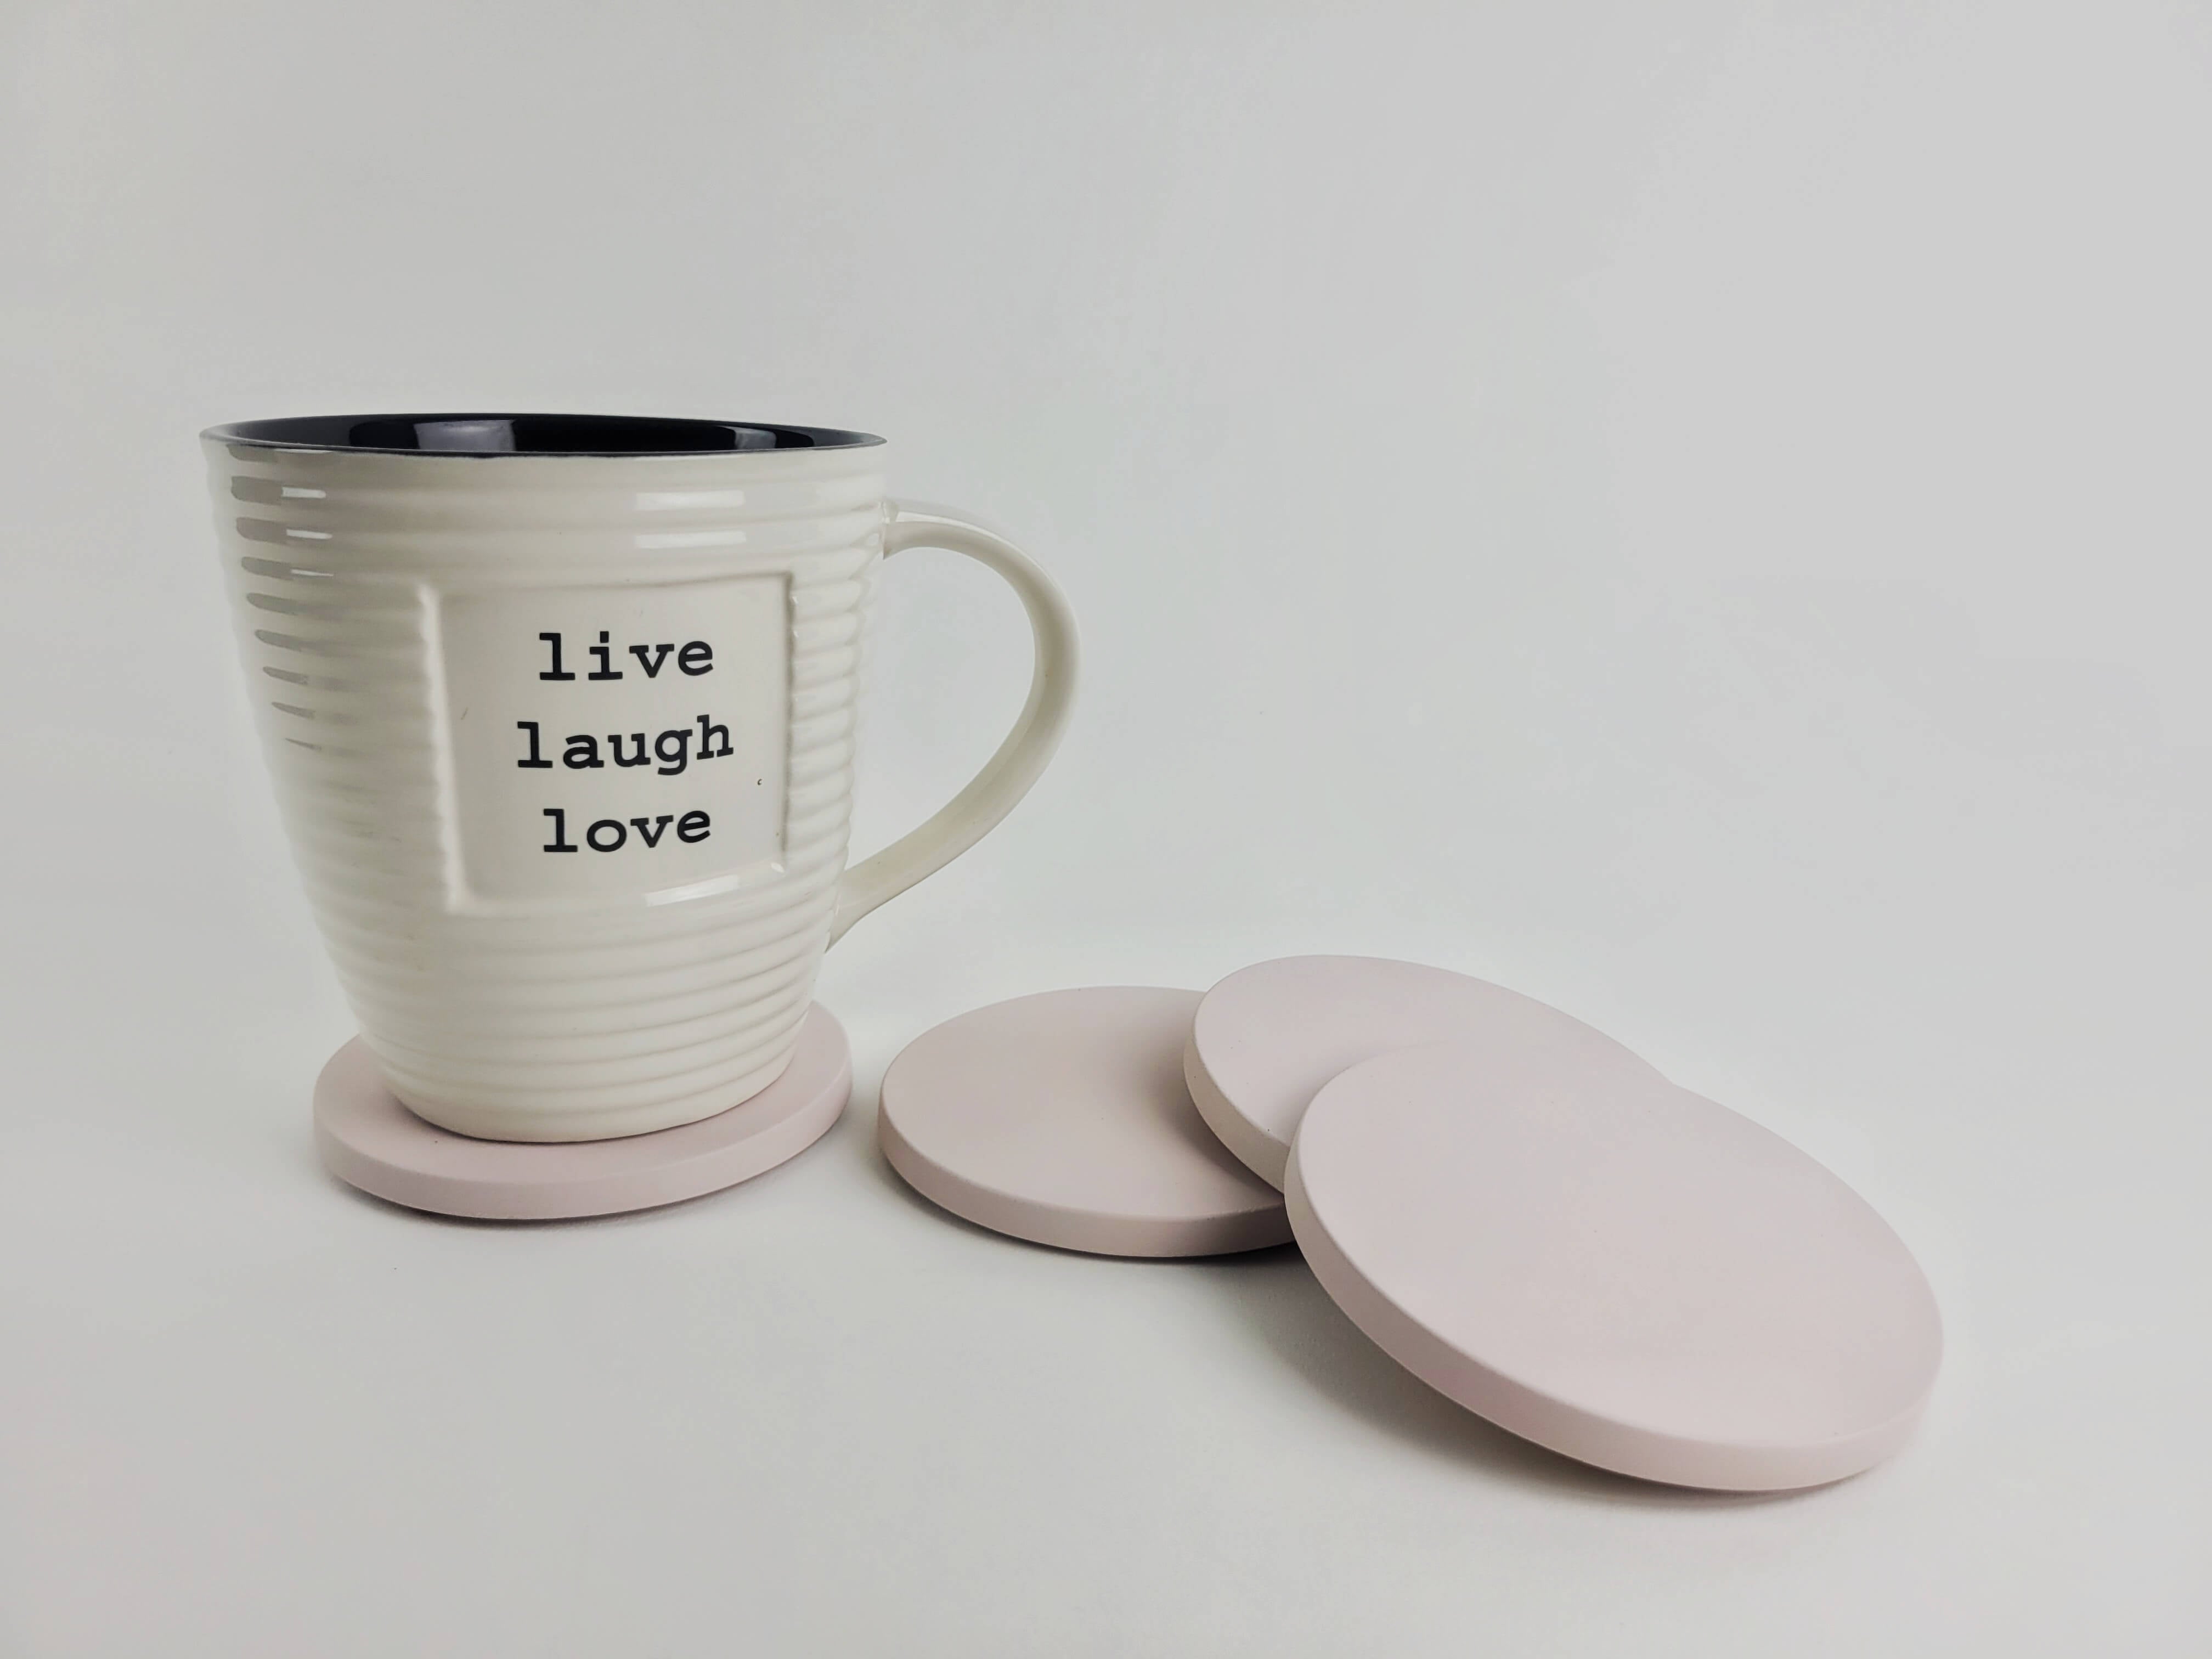 Set of 4 pastel pink concrete coasters with a coffee mug resting on one, showcasing elegant home decor.